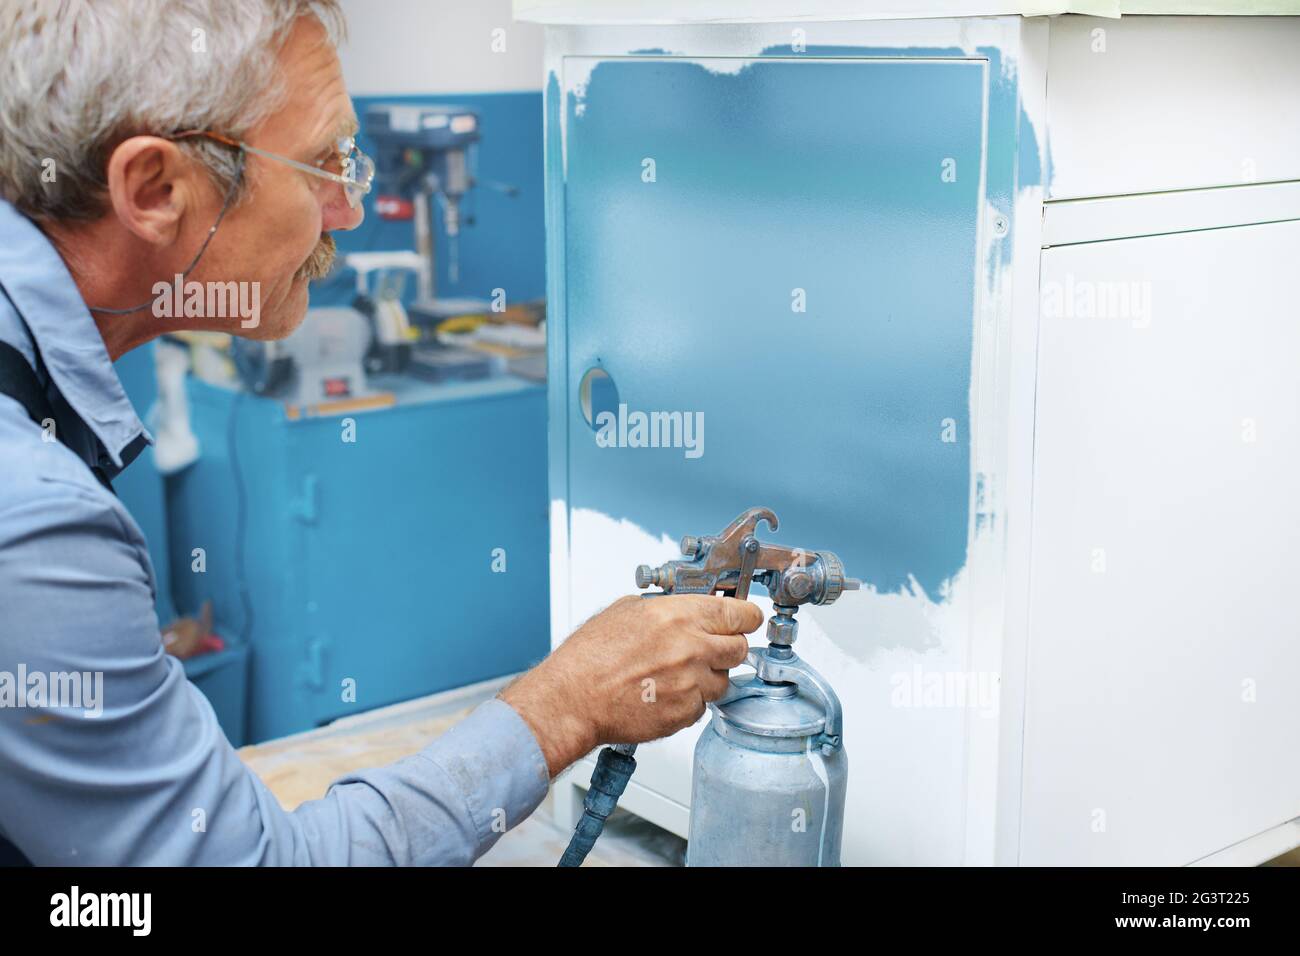 Painting of metal products. An elderly man paints a Cabinet with a compressor Stock Photo